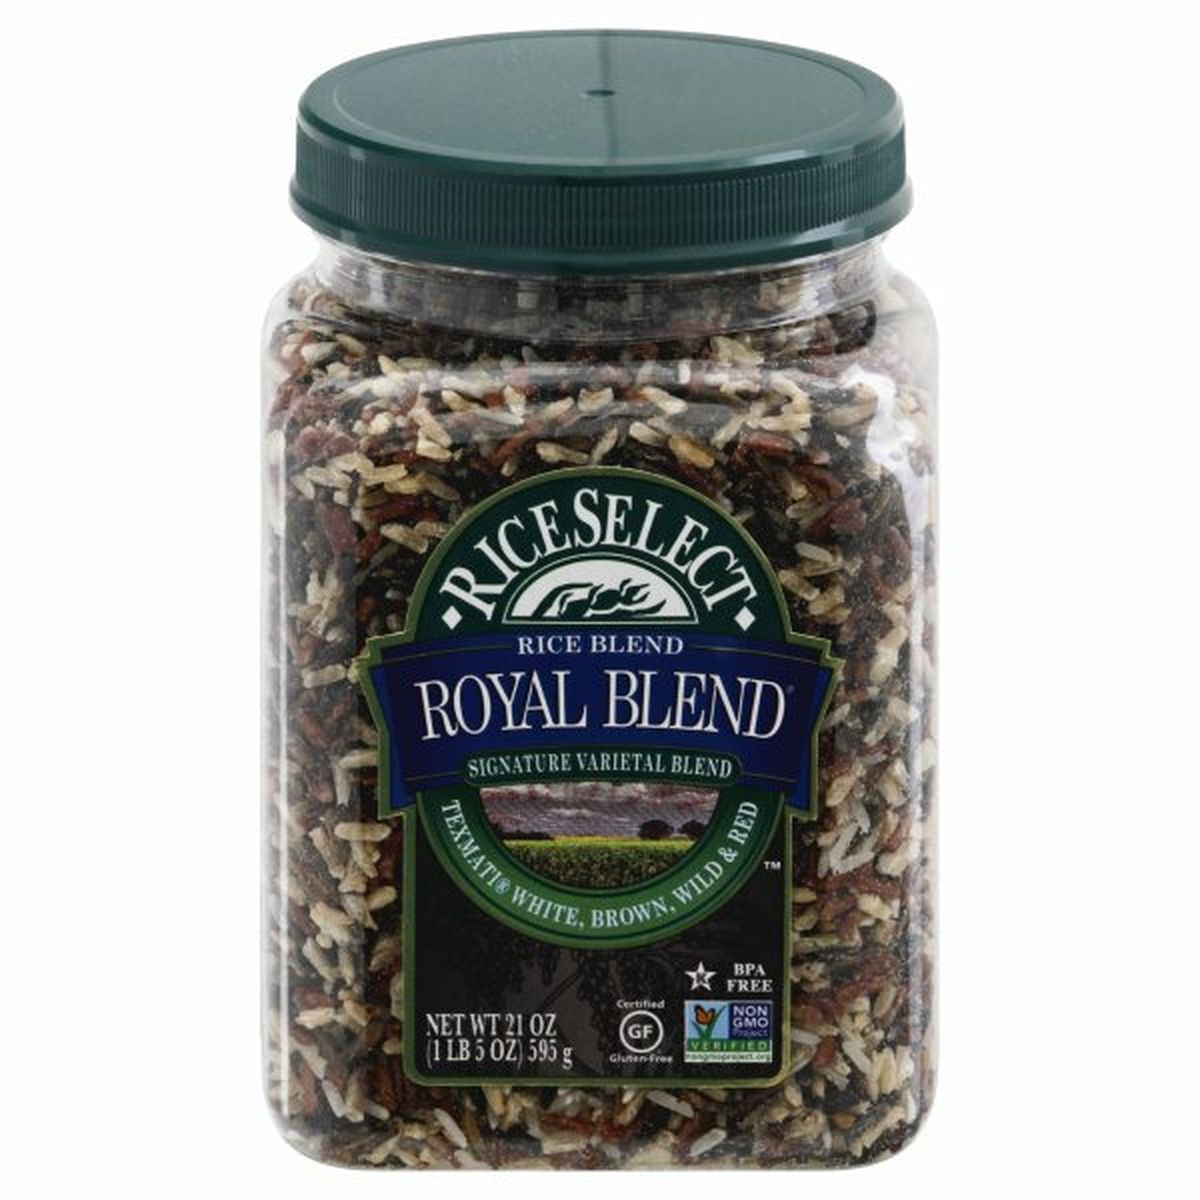 Calories in RiceSelect Royal Blend Rice, Royal Blend